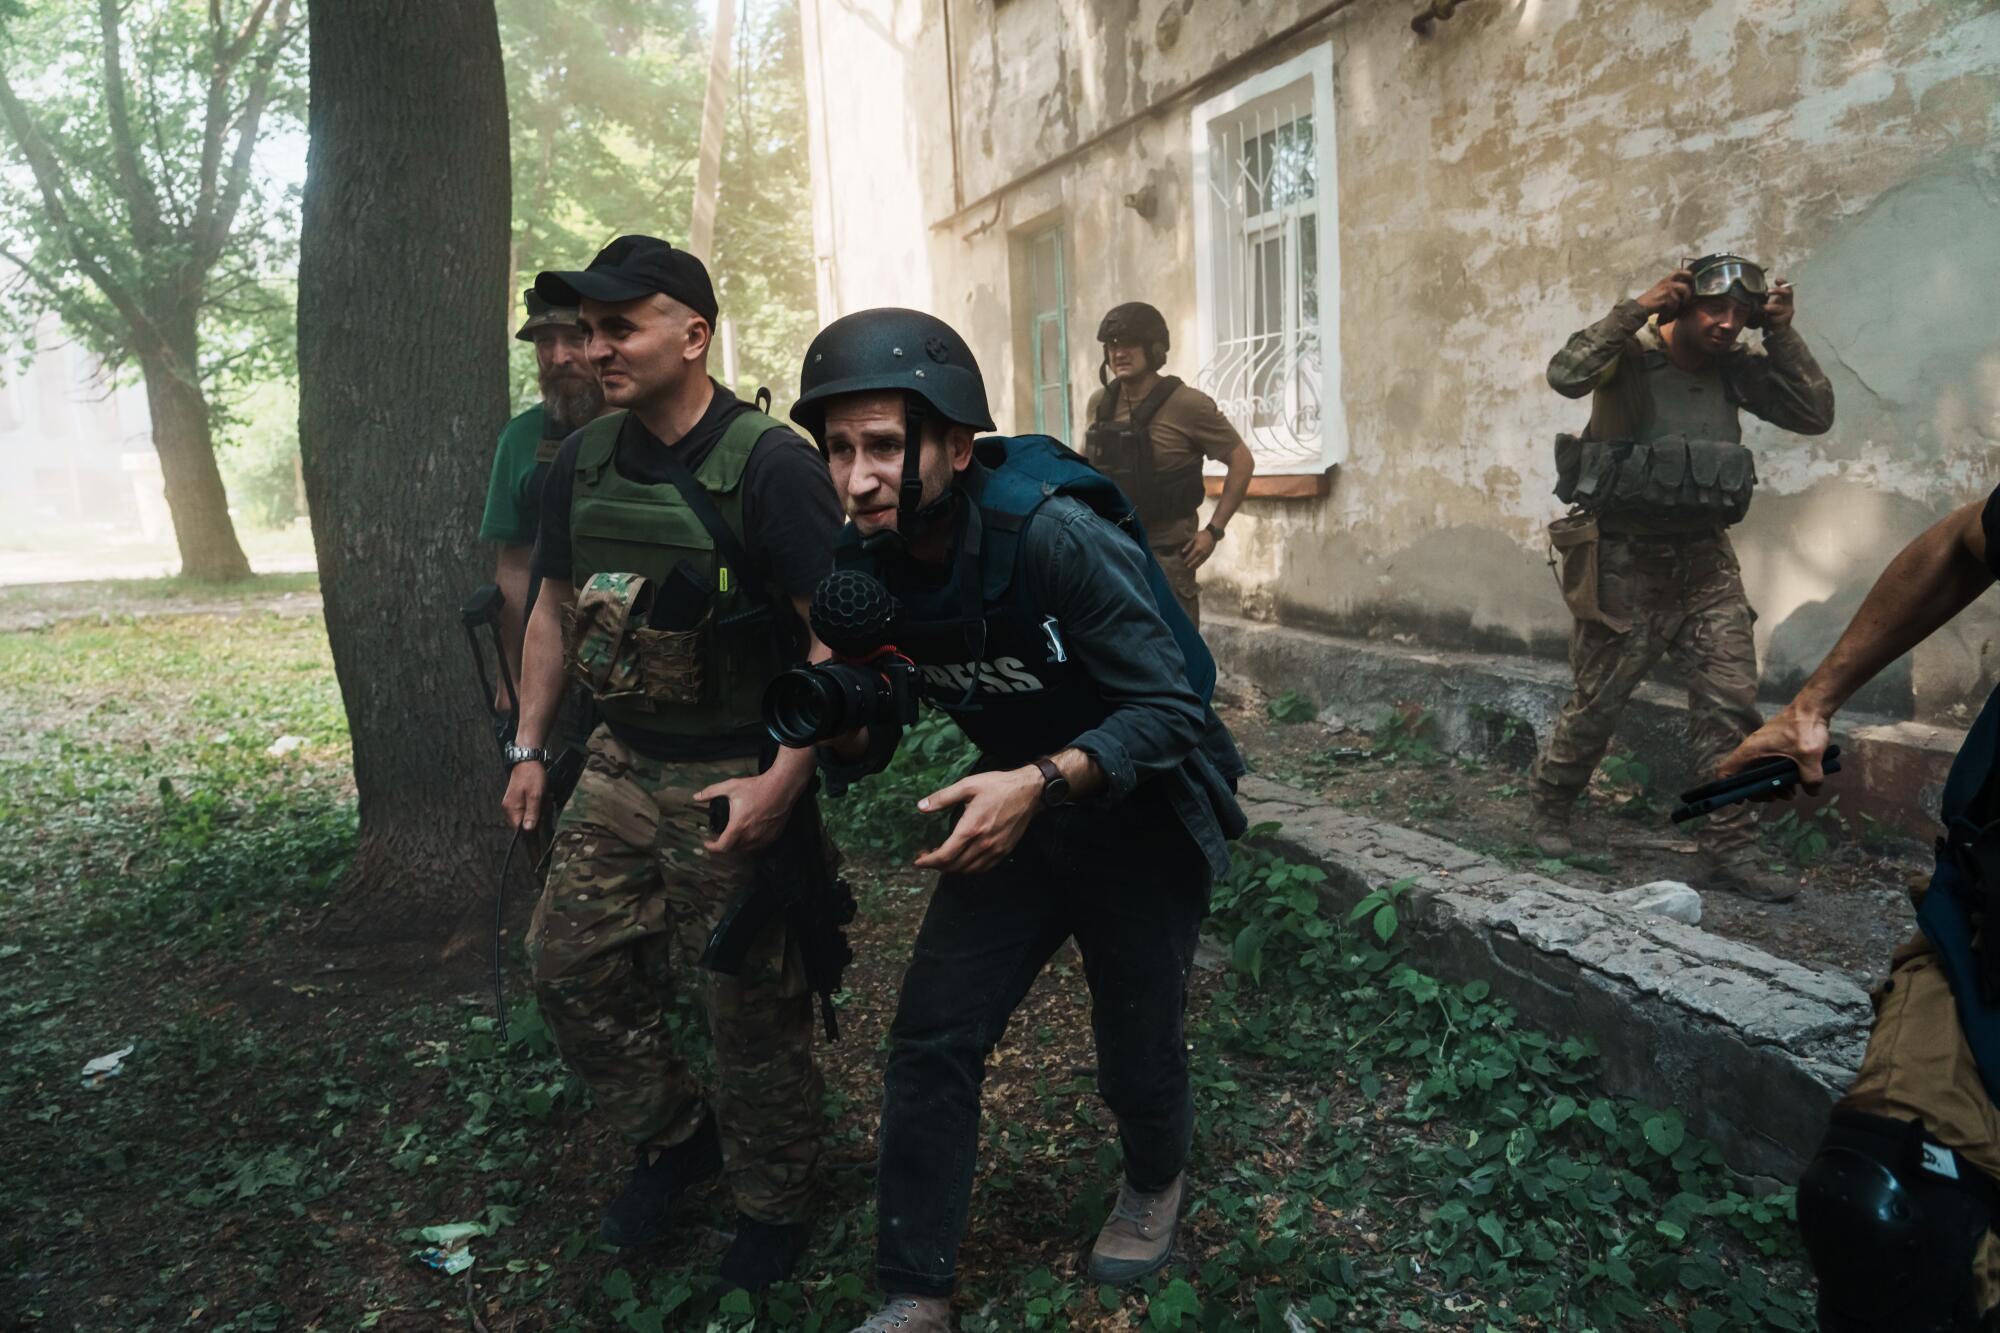 Soldiers and journalists flee for cover after a bombardment hit nearby, sending dust in the air, in Lysychansk, Ukraine.